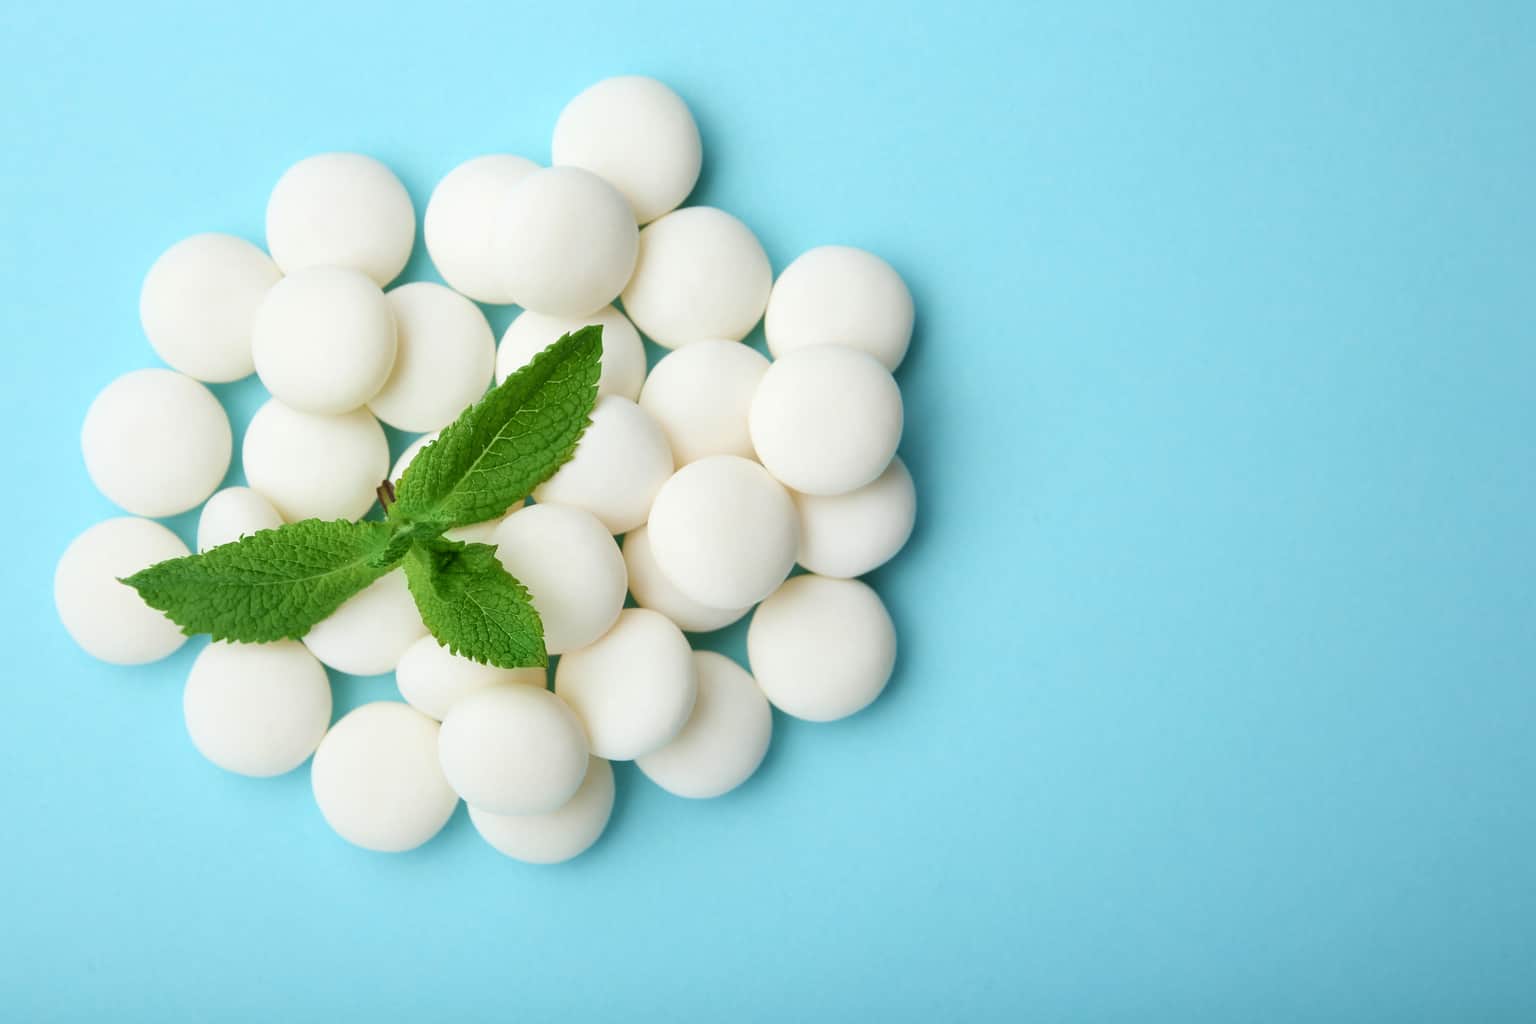 The shocking thing most men don’t know about mints